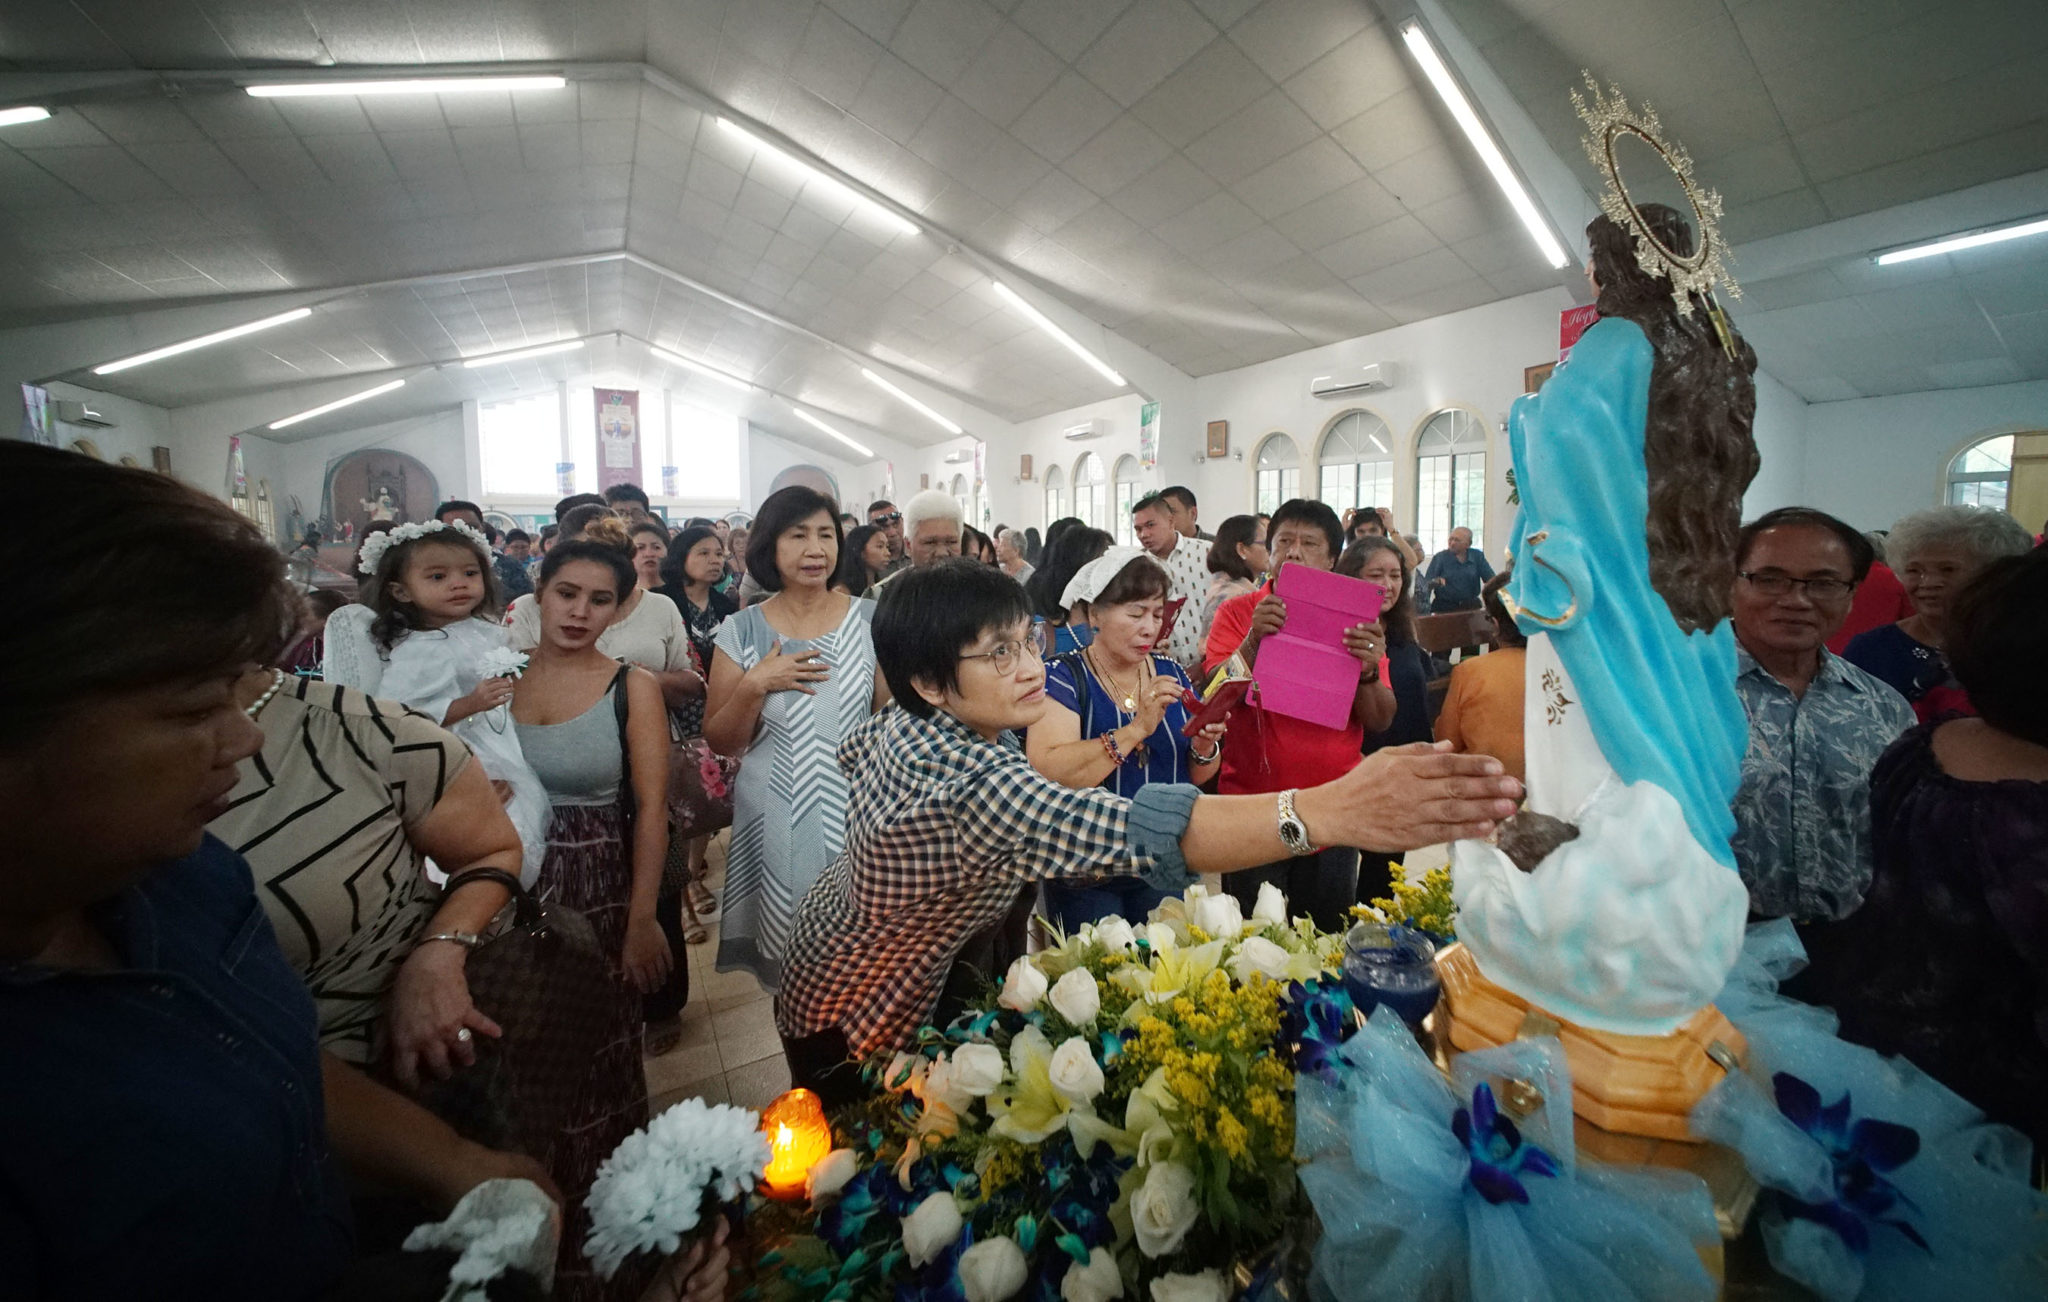 Parishioners pay their respects during mass/celebration held at Assumption of Our Lady in Piti, Guam.